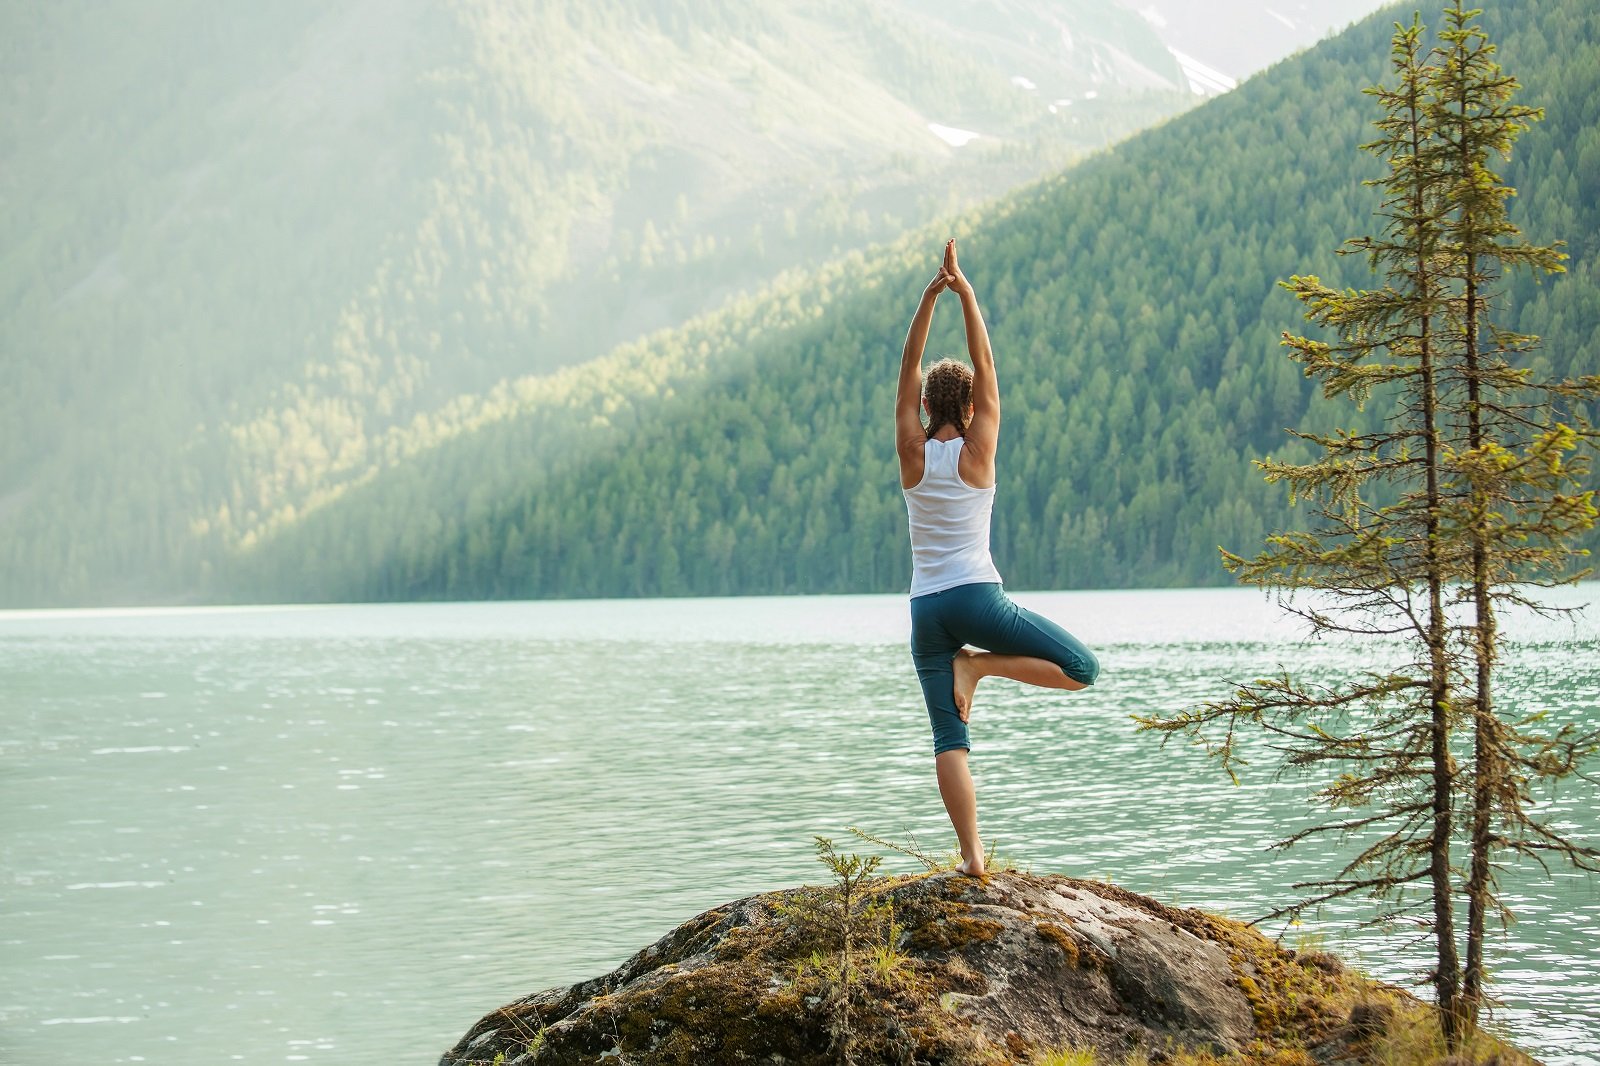 Yoga Tourism: Relax your body and mind - eDreams Travel Blog